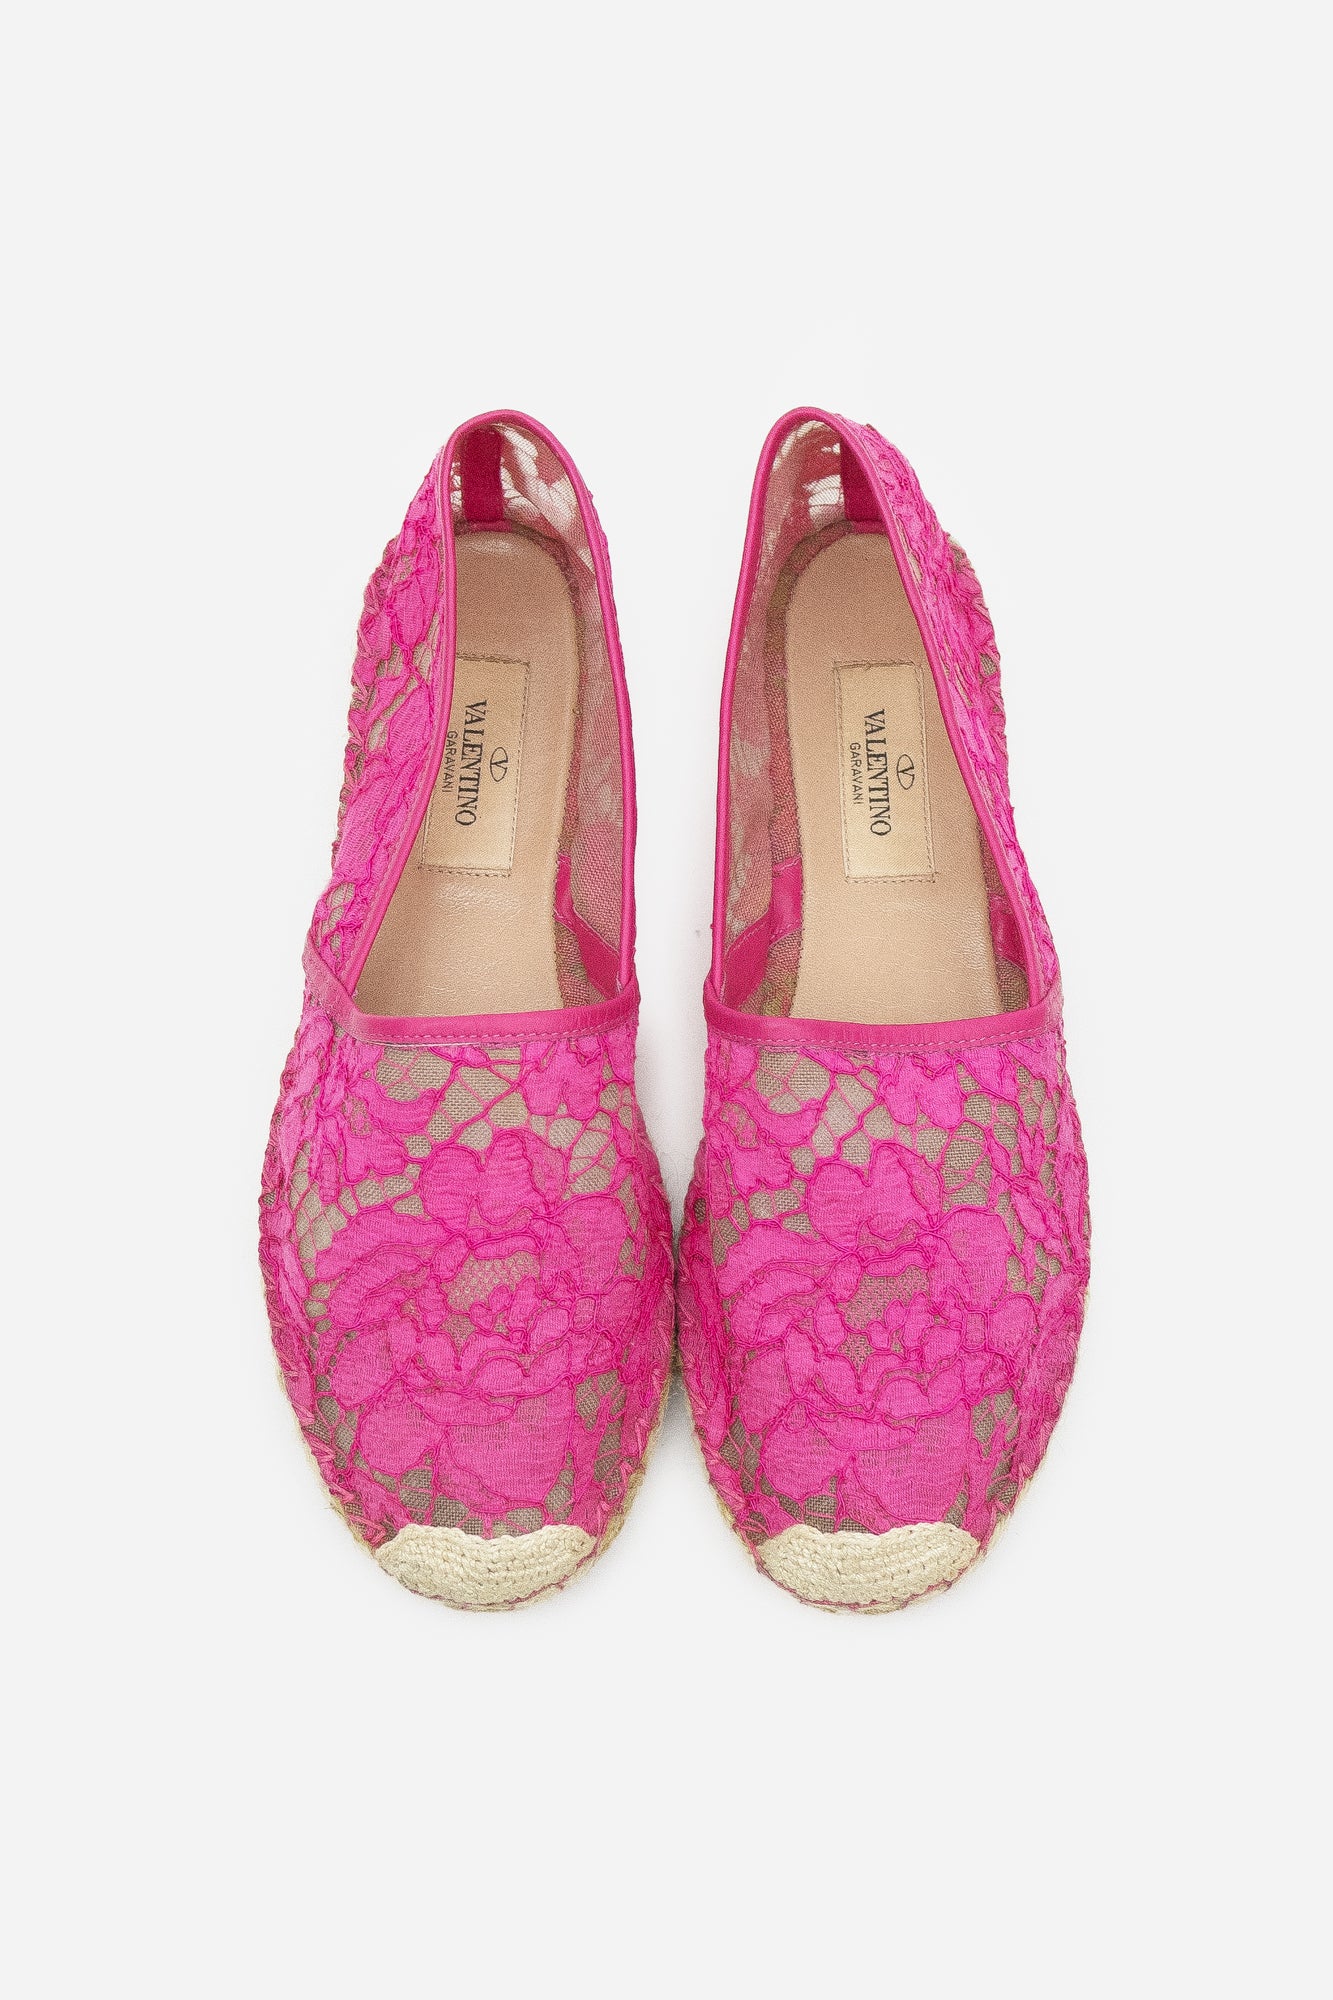 Pink Lace and Leather Espadrilles Flats